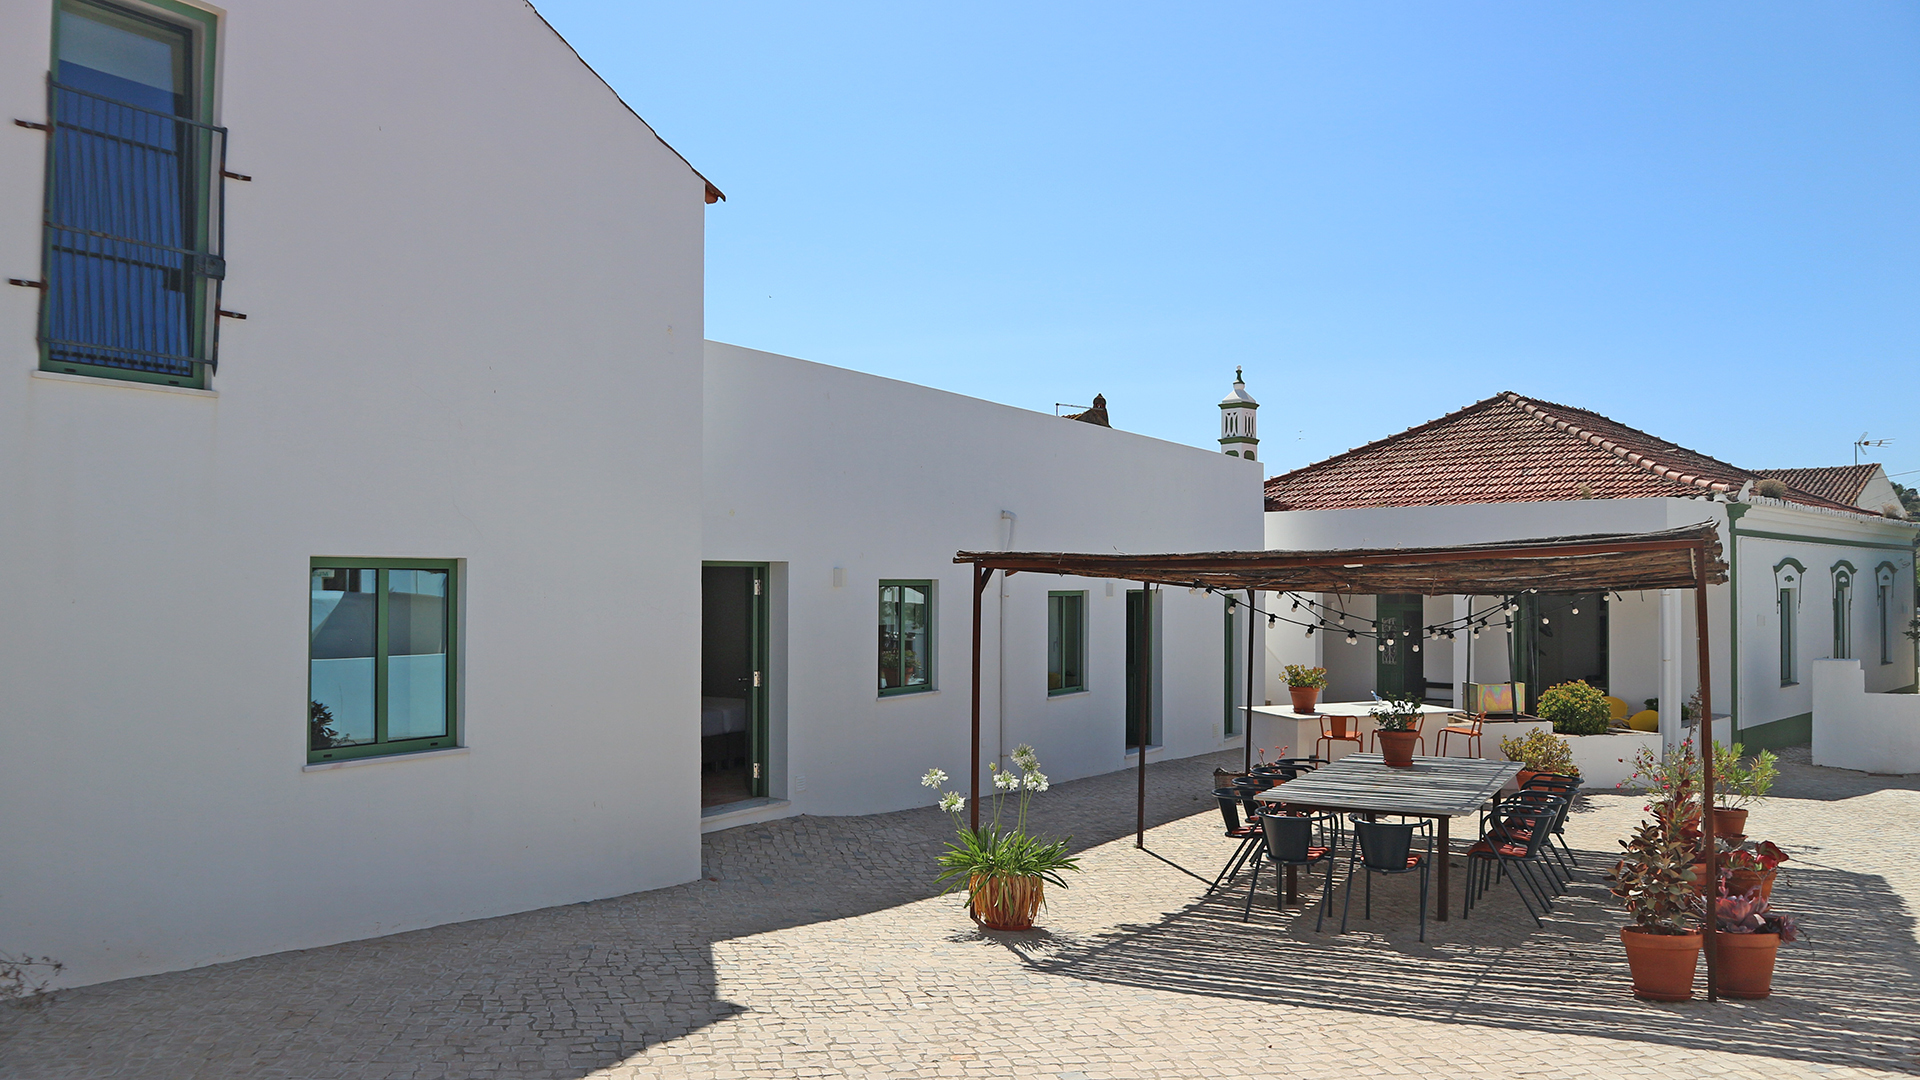 6 bedroom guesthouse complex in village near Silves  | LG2133 